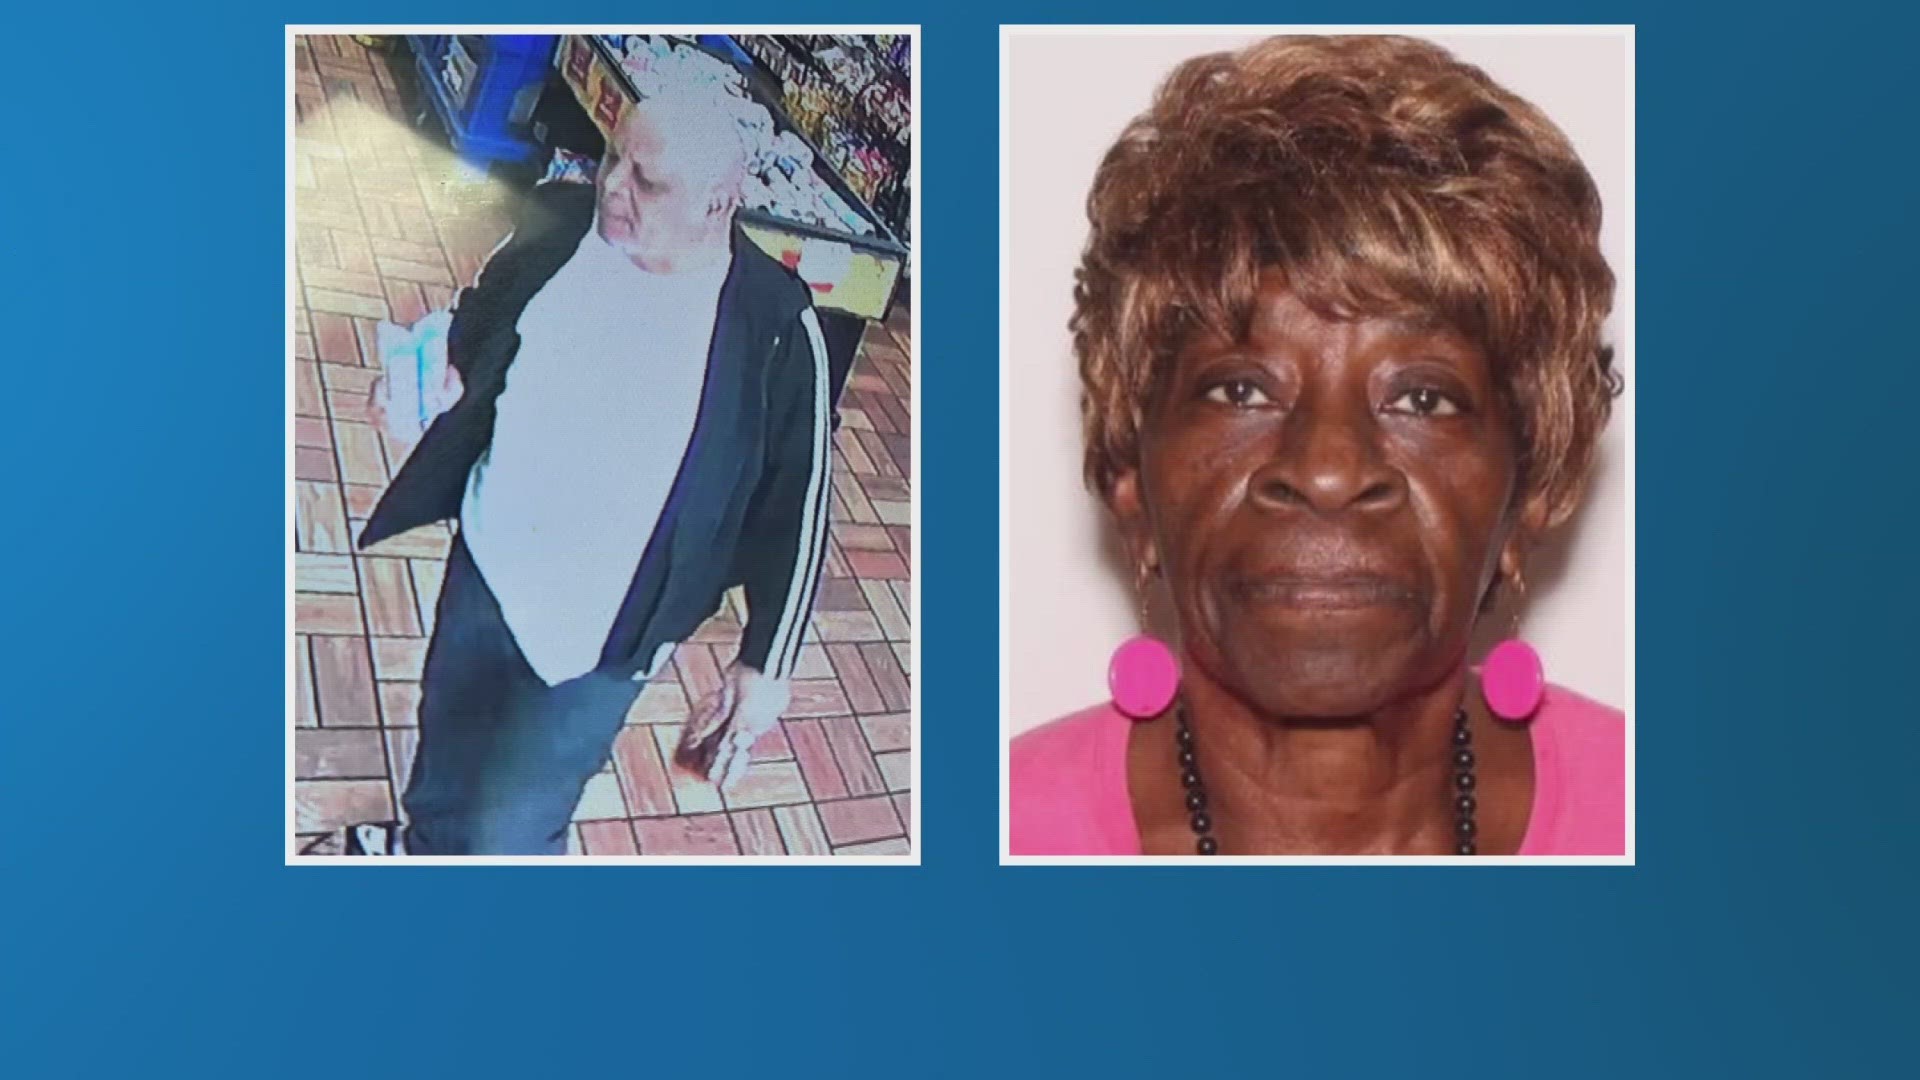 Doris Coleman, 79, was reported missing after leaving a home and not returning. Police released a photo of a man they're also searching for in connection to Coleman.